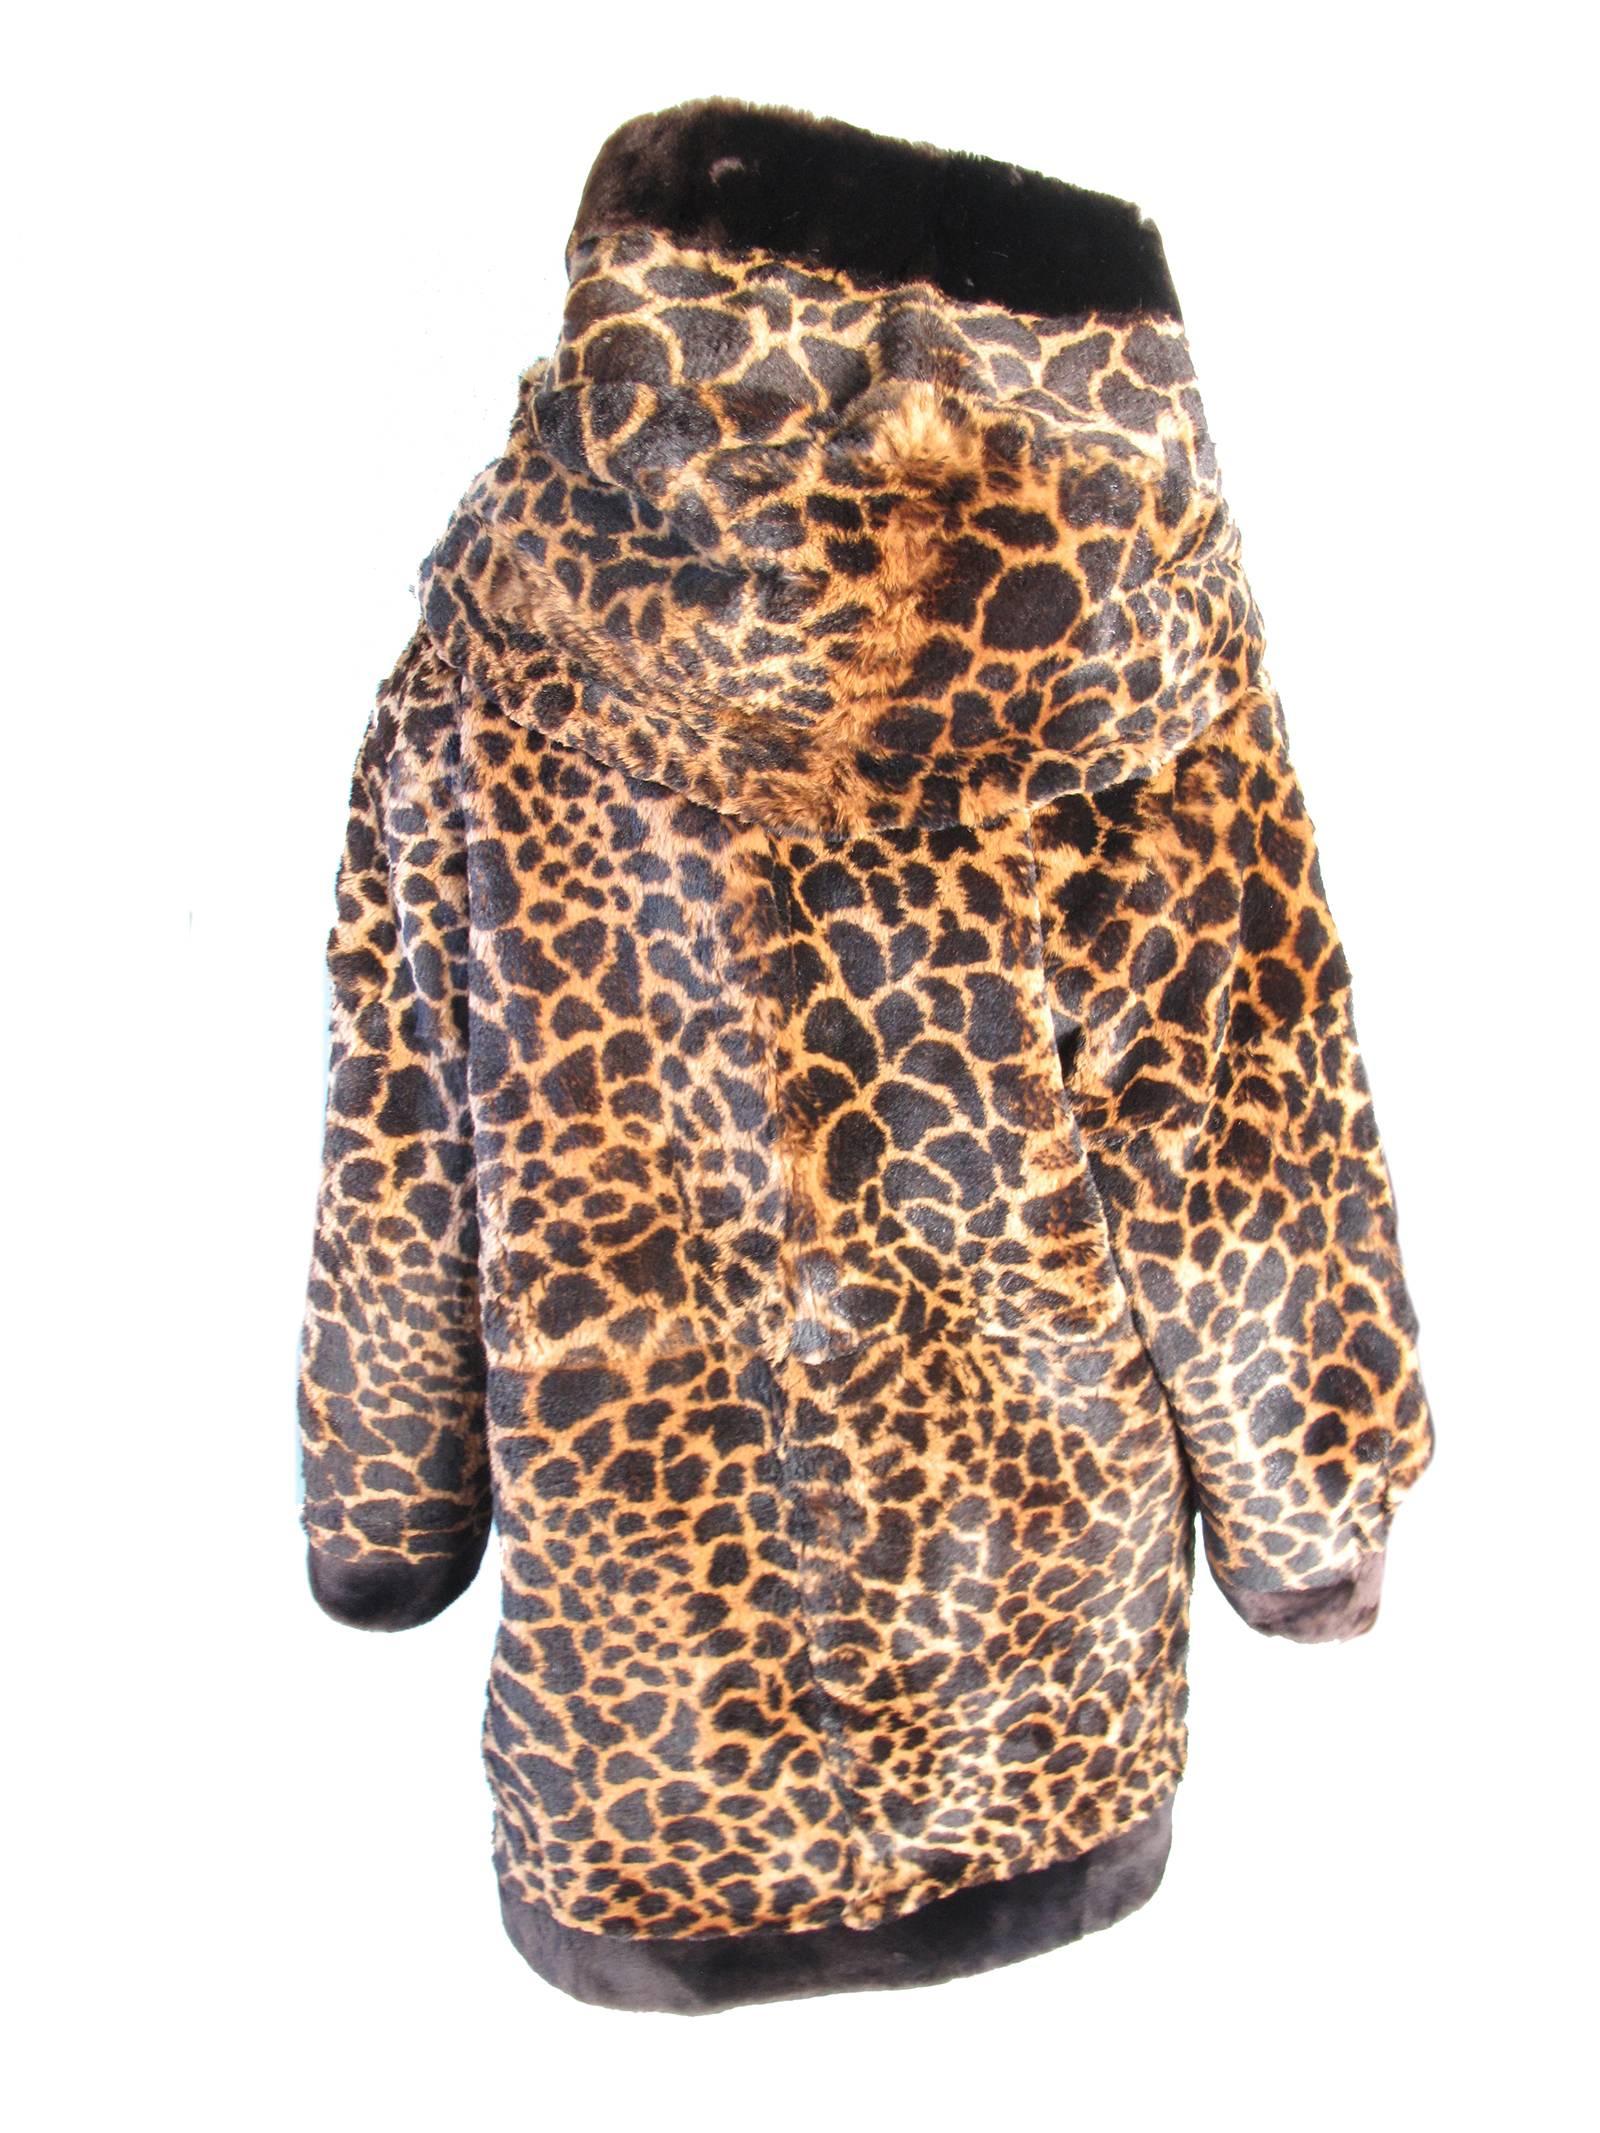 Yves Saint Laurent oversized hooded beaver fur coat, 1980s.  Condition: Excellent. Size Large

We accept returns for refund, please see our terms.  We offer free ground shipping within the US. 